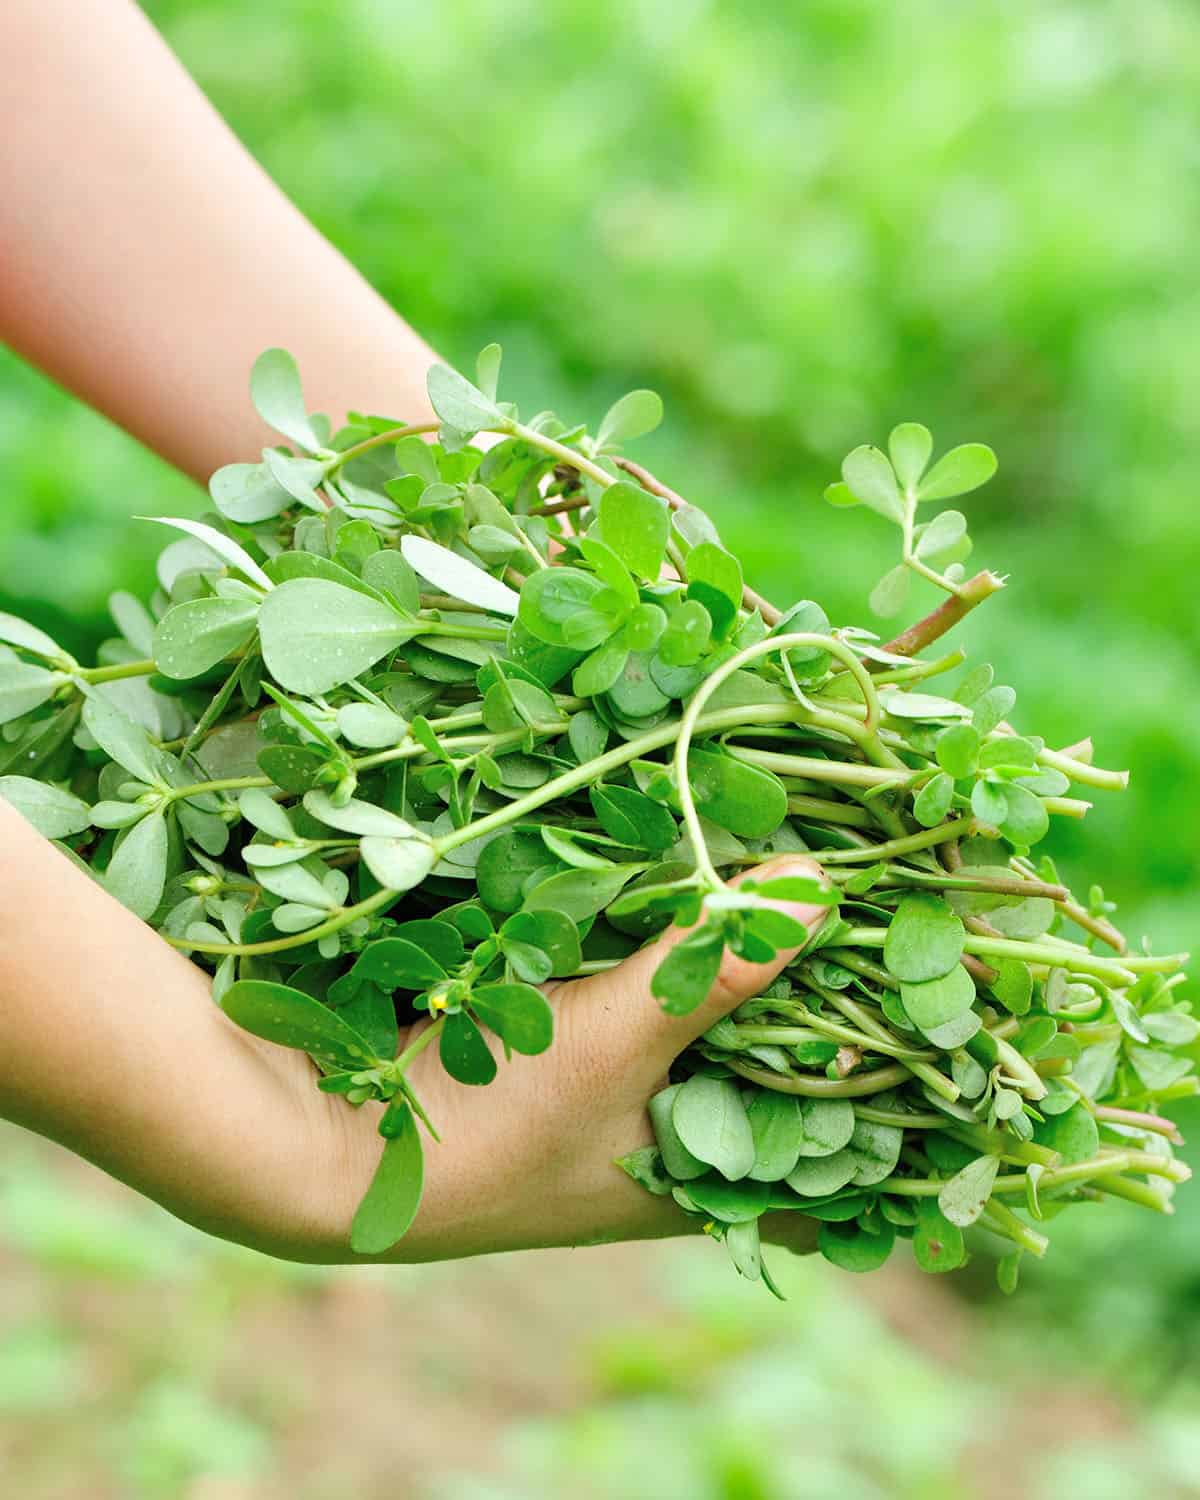 Hands holding a large harvest of common purslane.